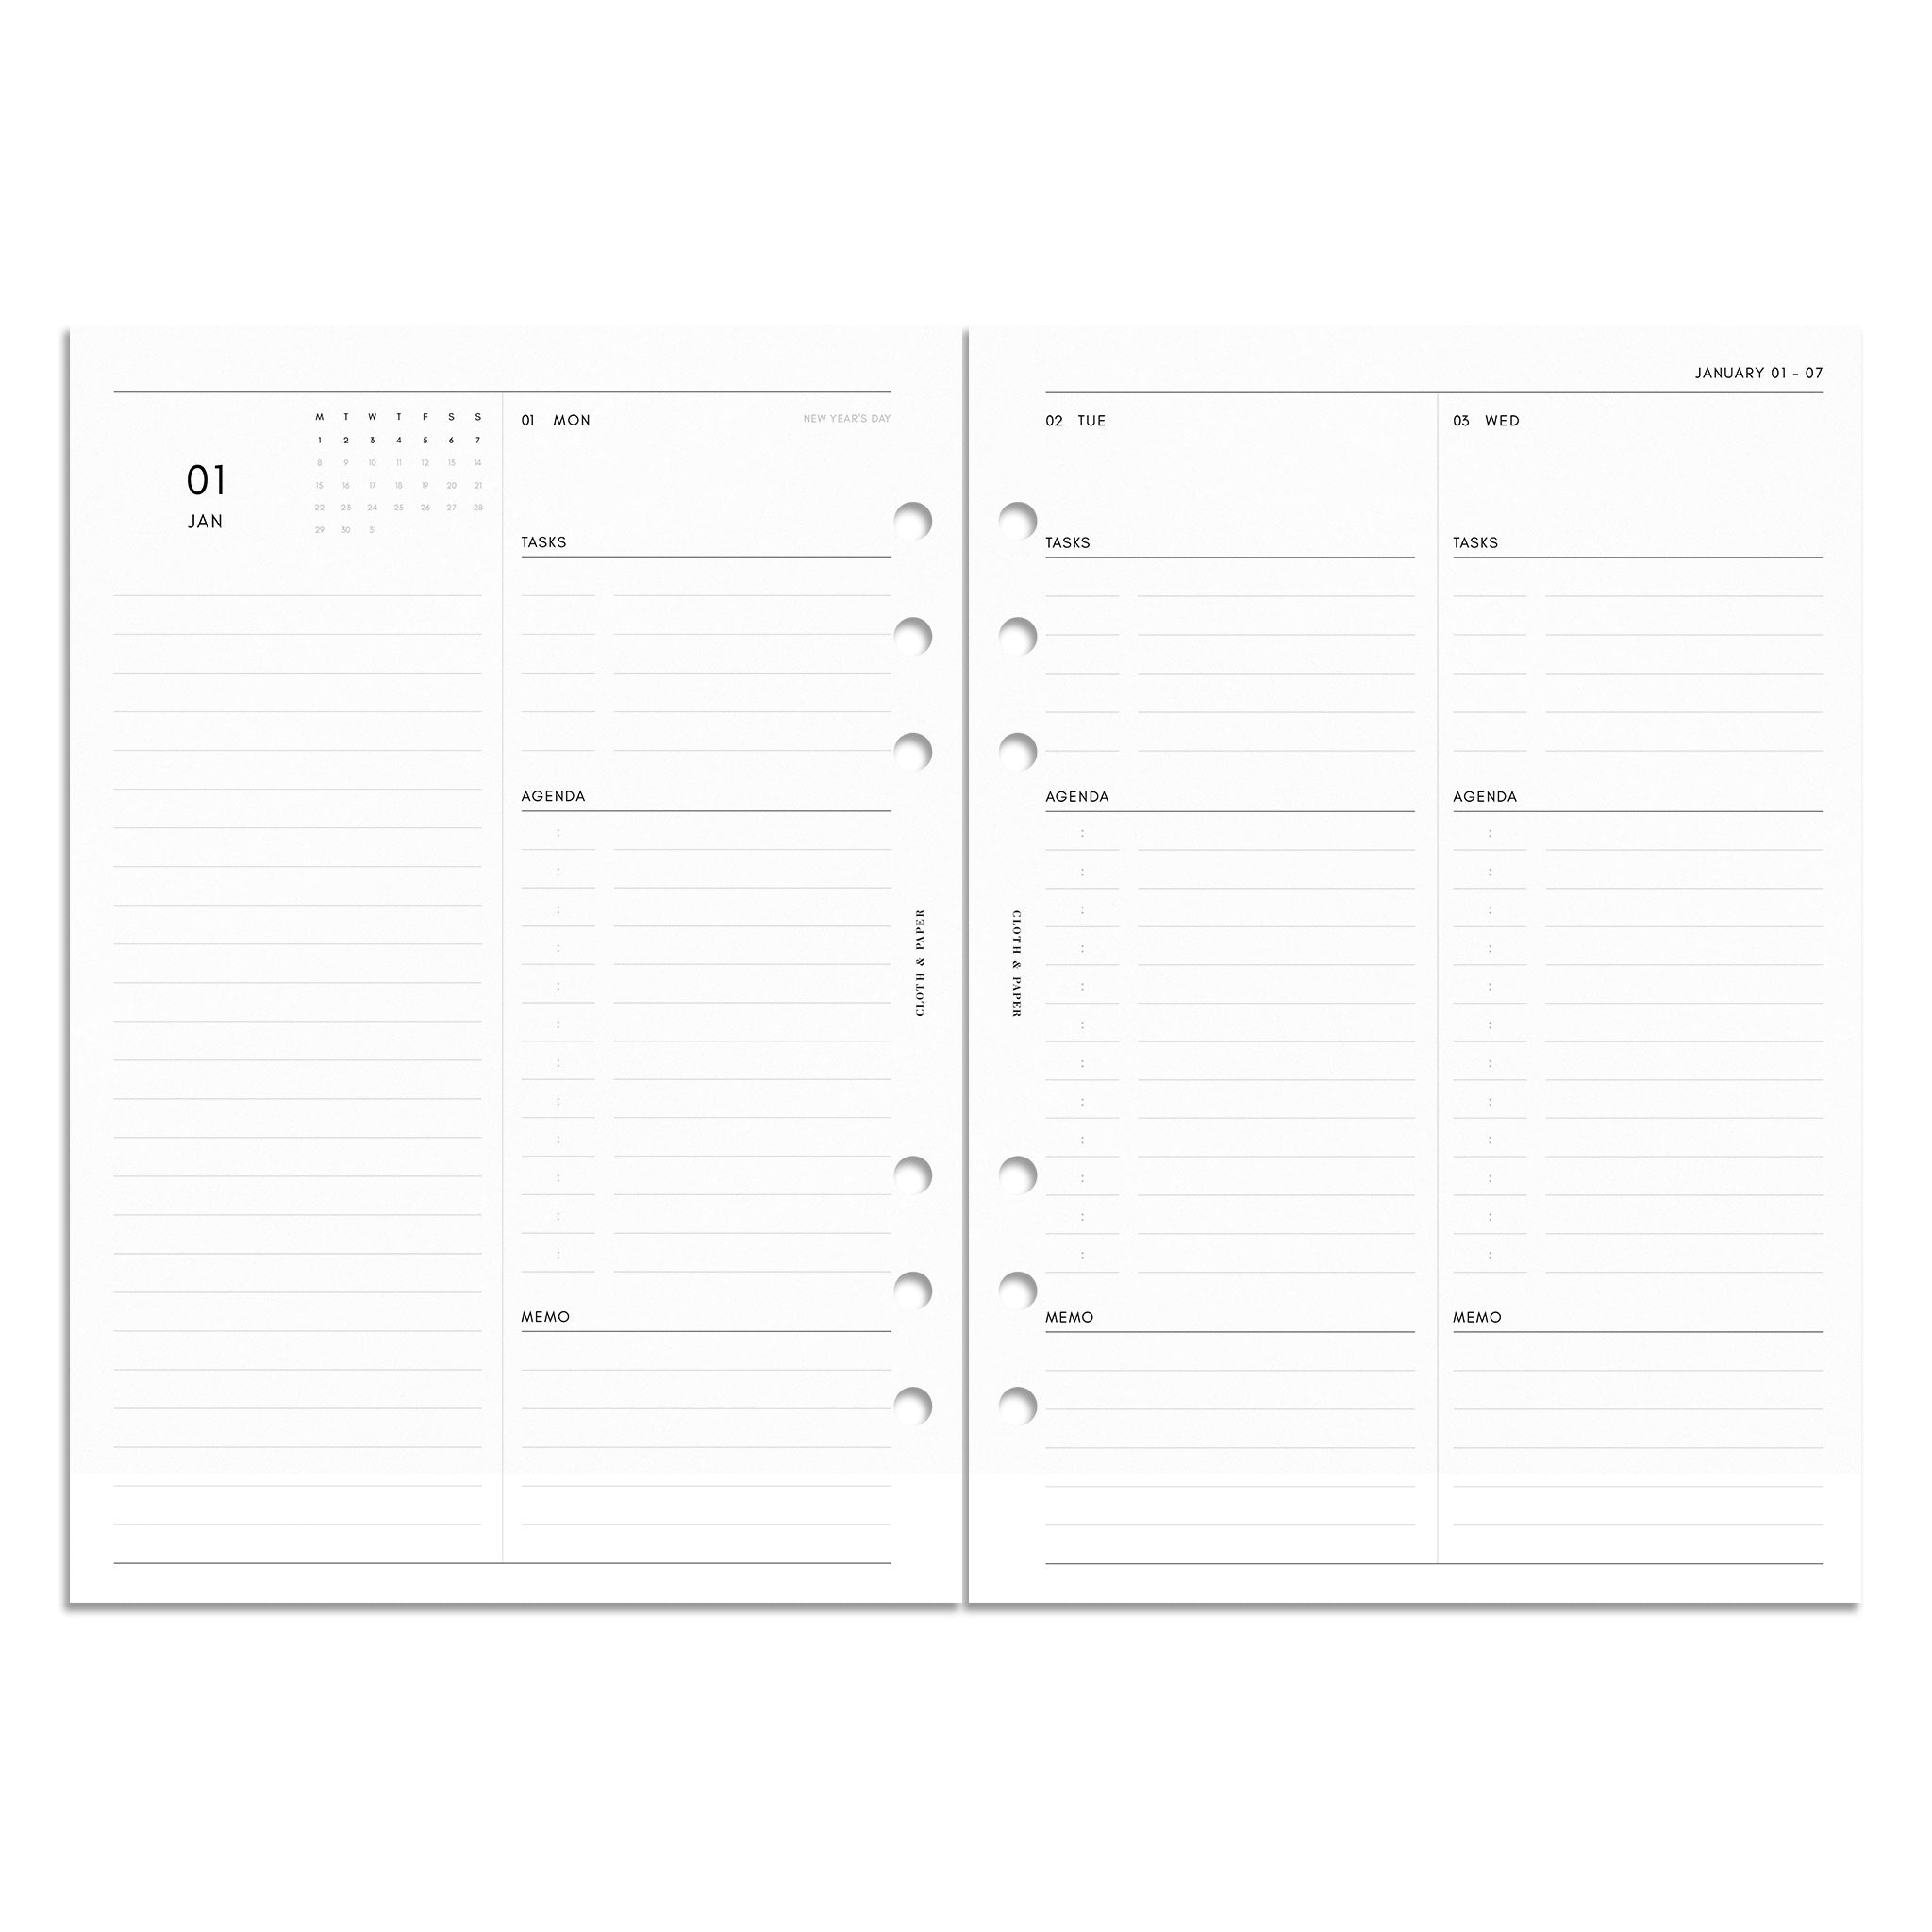 2024 A5 Planner Inserts